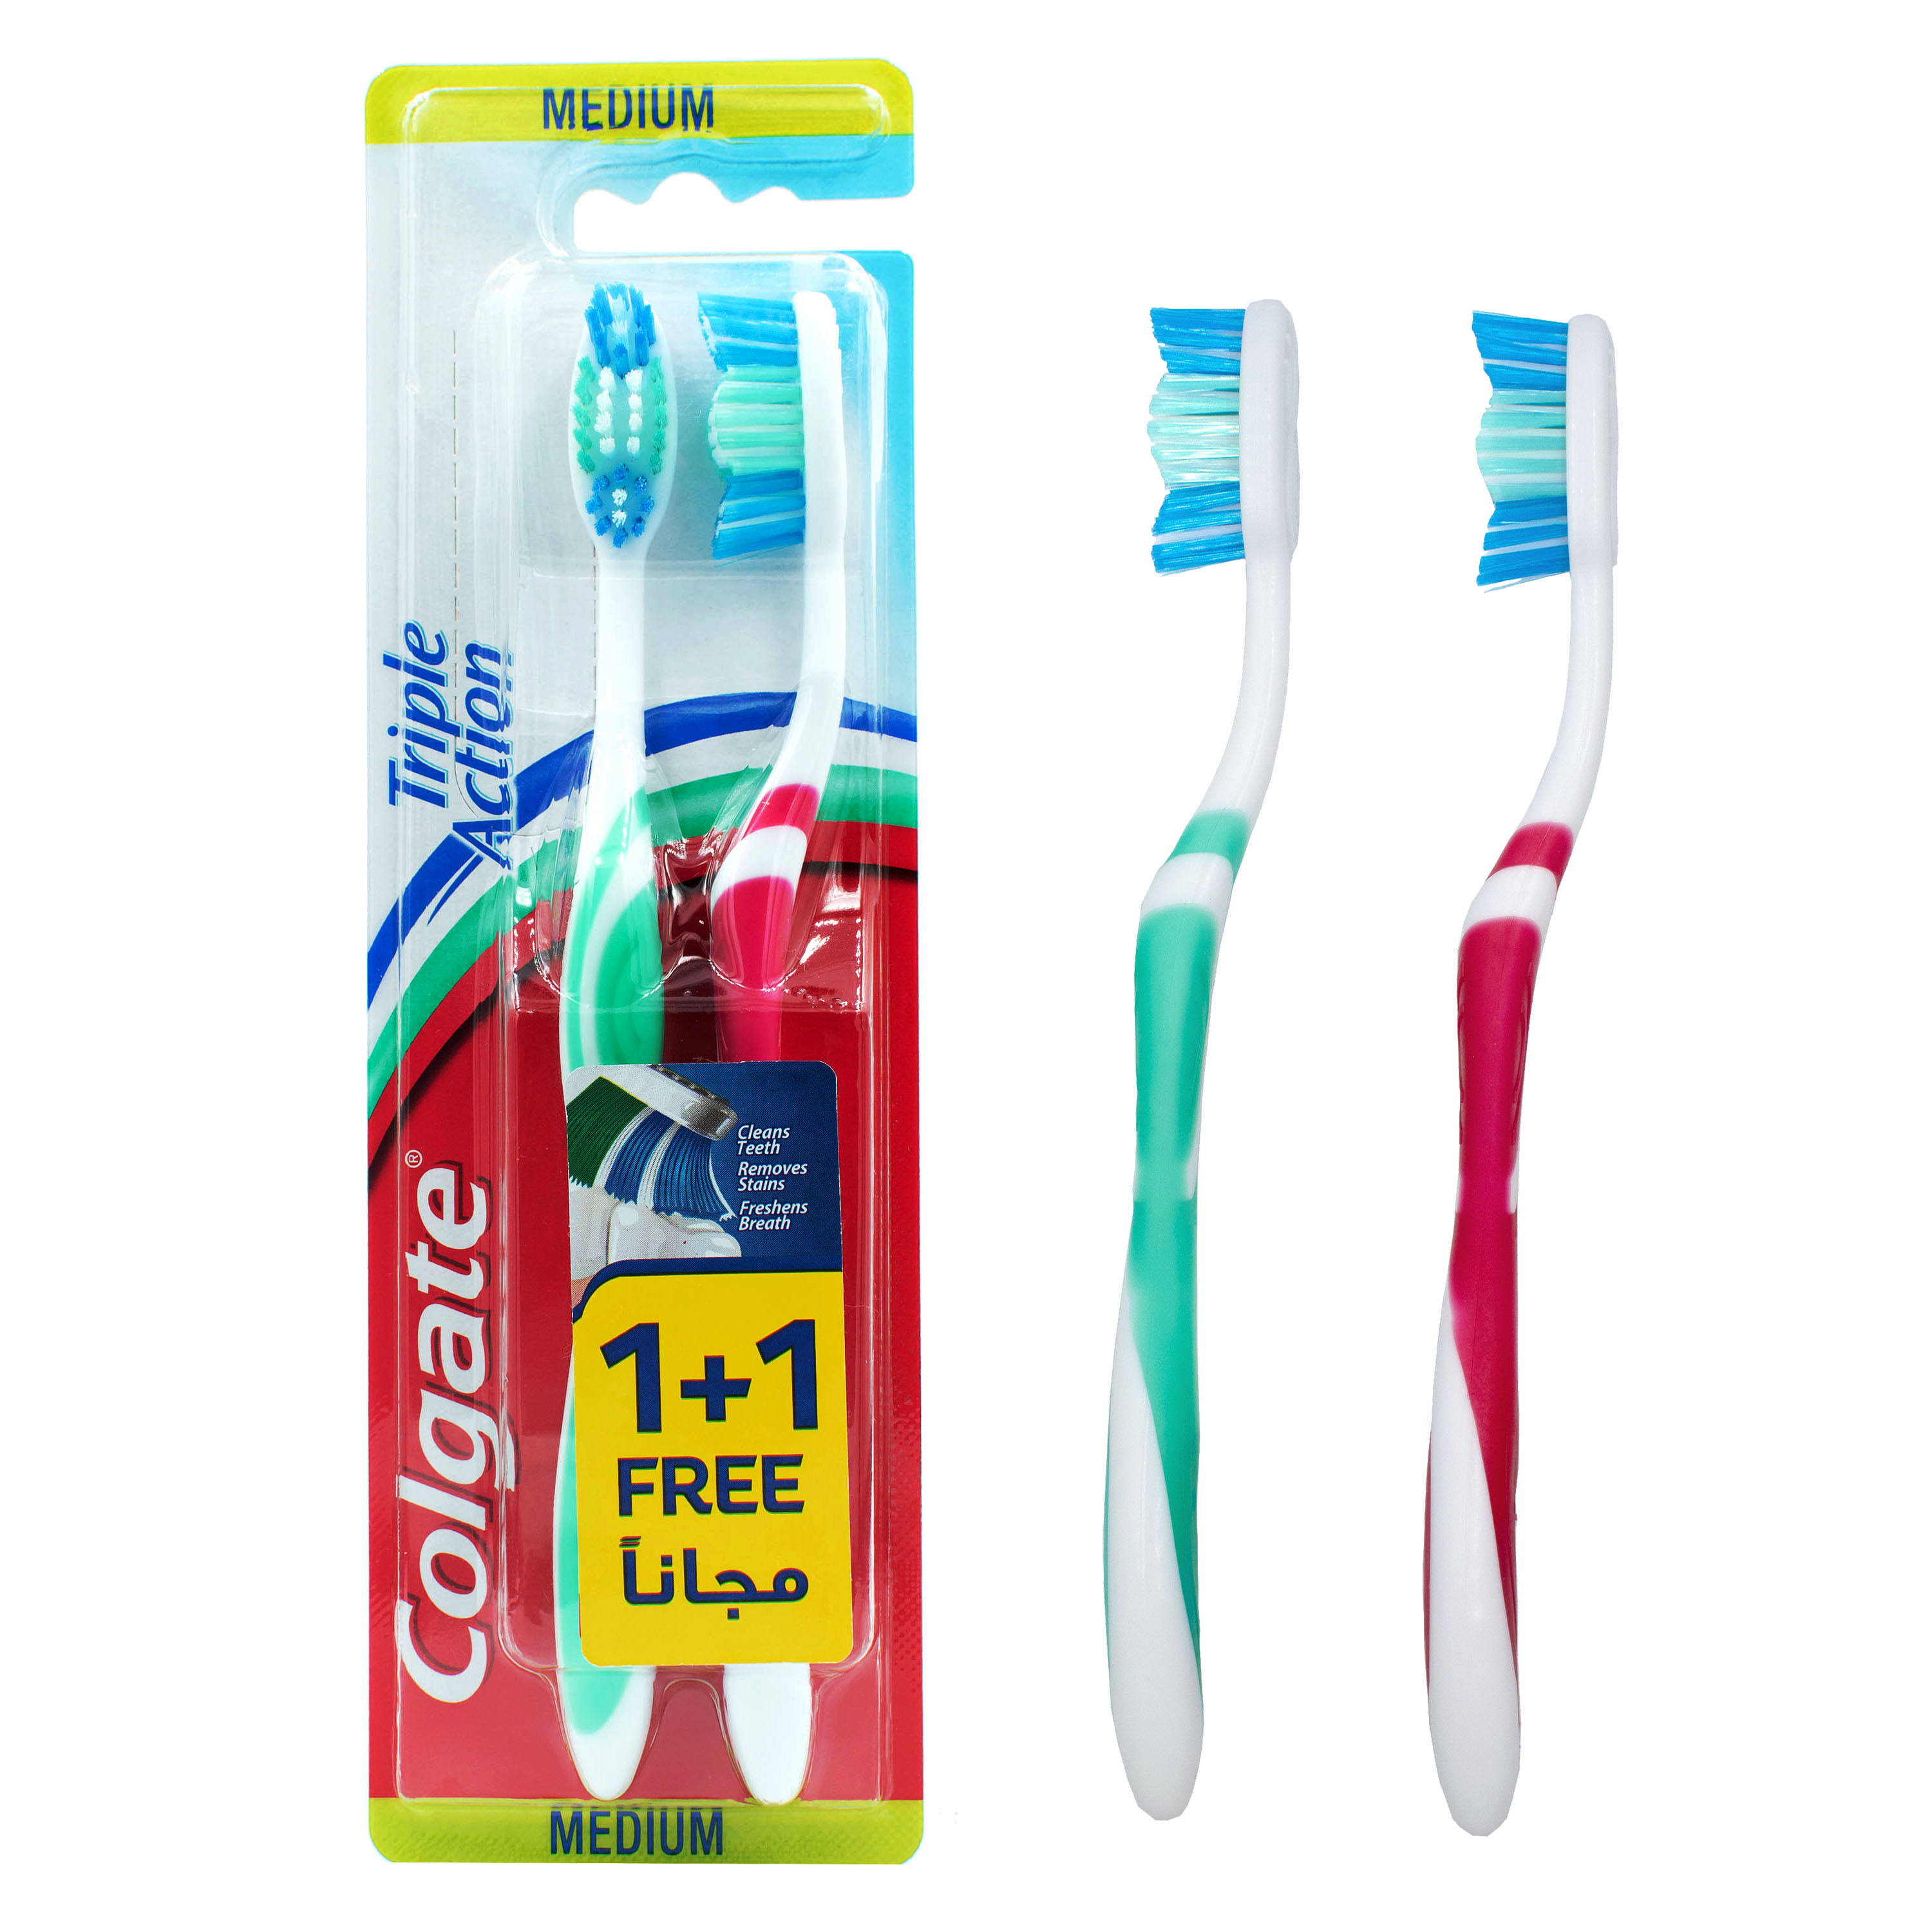 Colgate Triple Action Medium Toothbrush – Colour May Vary